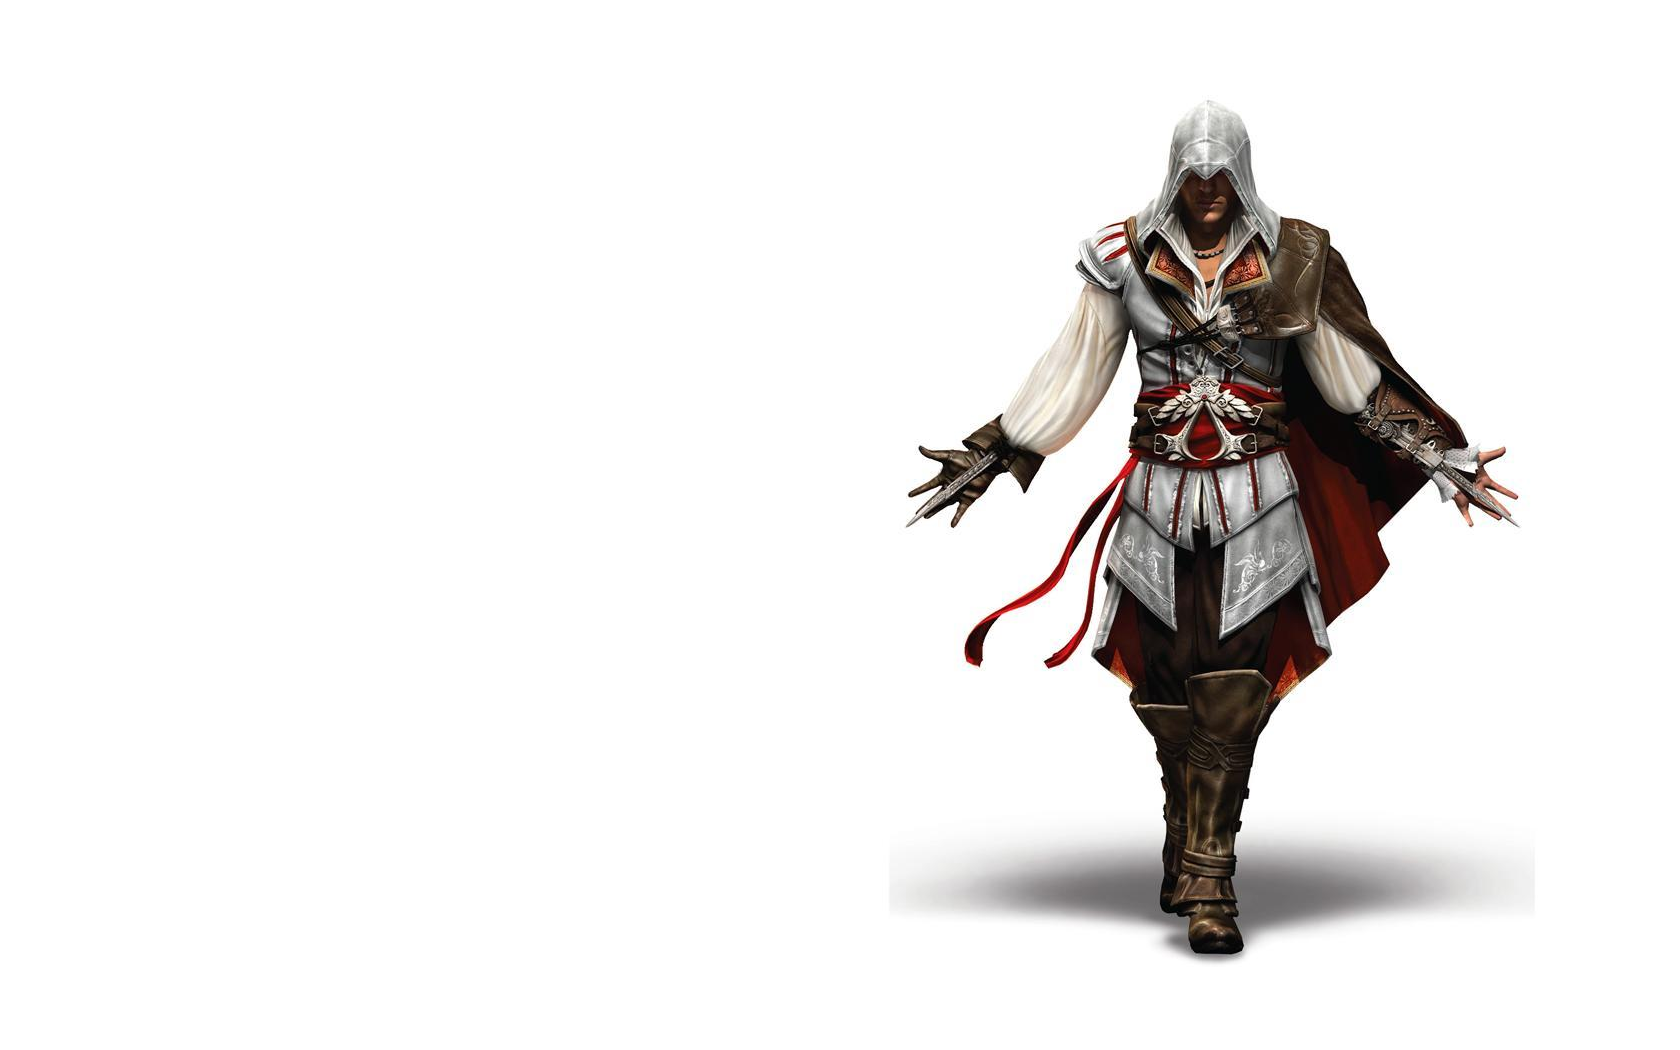 General 1680x1050 Ezio Auditore da Firenze video games white background simple background PC gaming video game men hoods video game characters